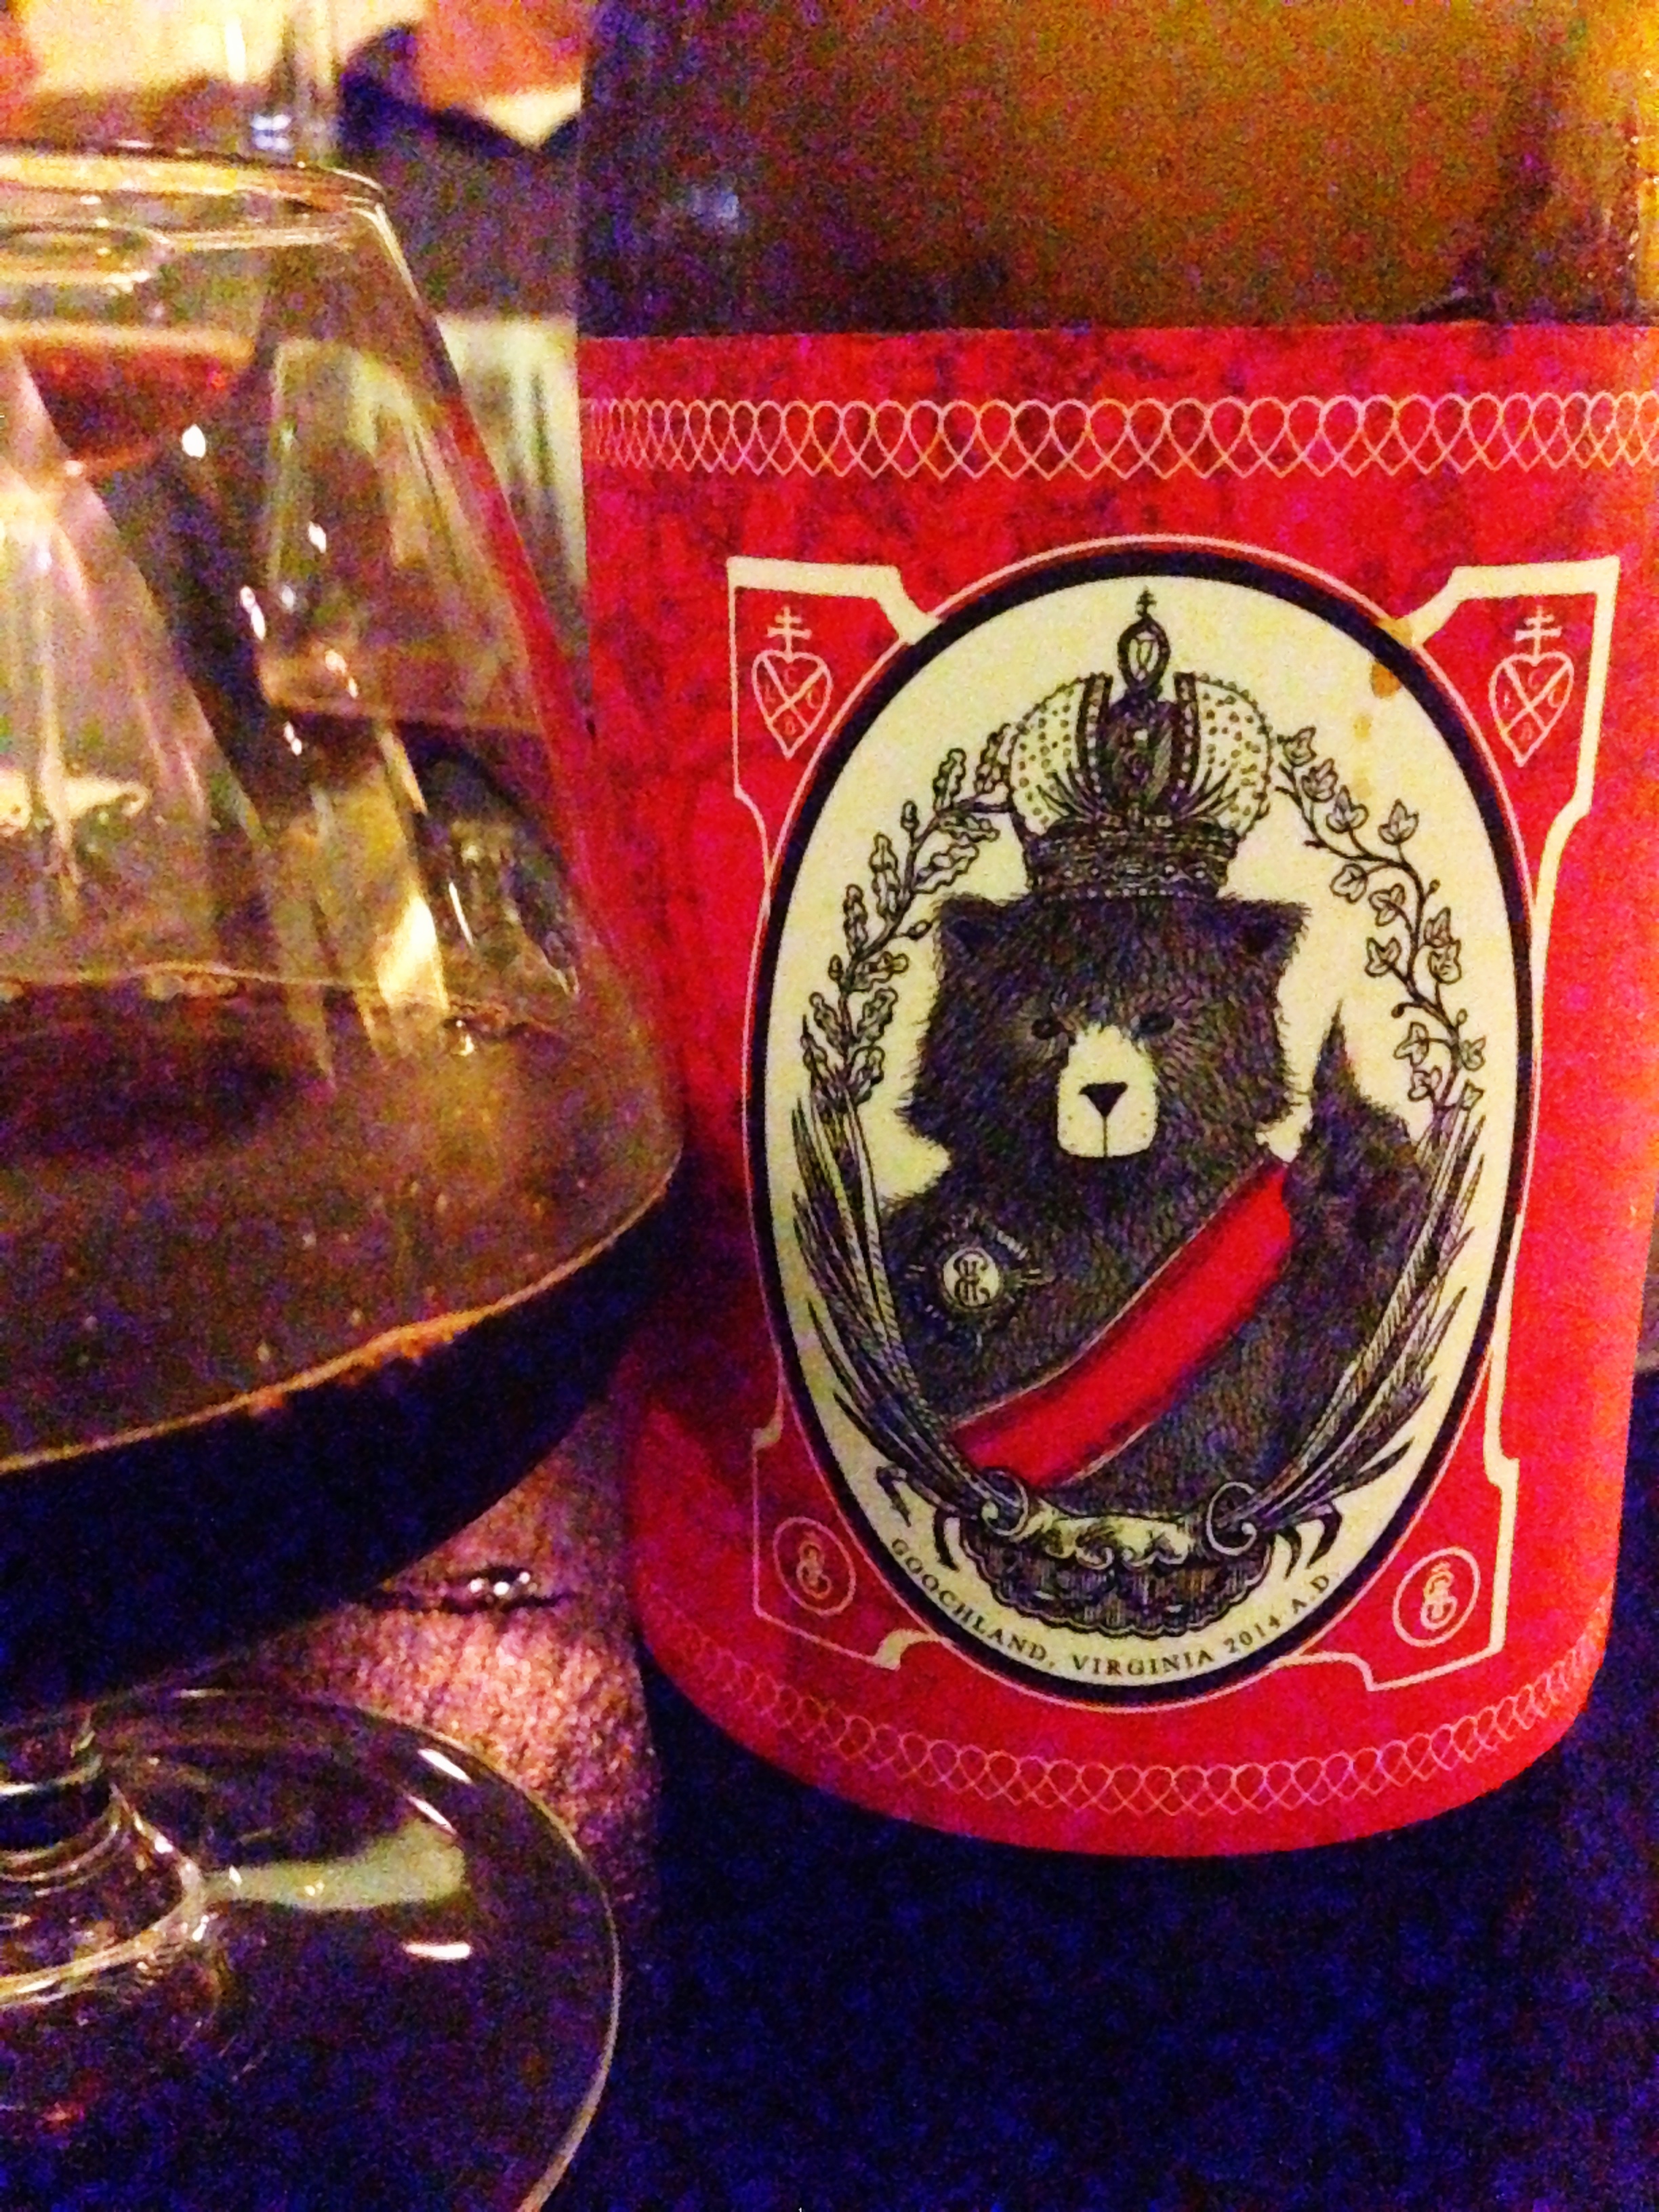 Lickinghole Creek Brewing Enlightened Despot Russian Imperial Stout with 10 diff malts, aged for 100 days in 15 Year Old Wheat Bourbon Barrels   